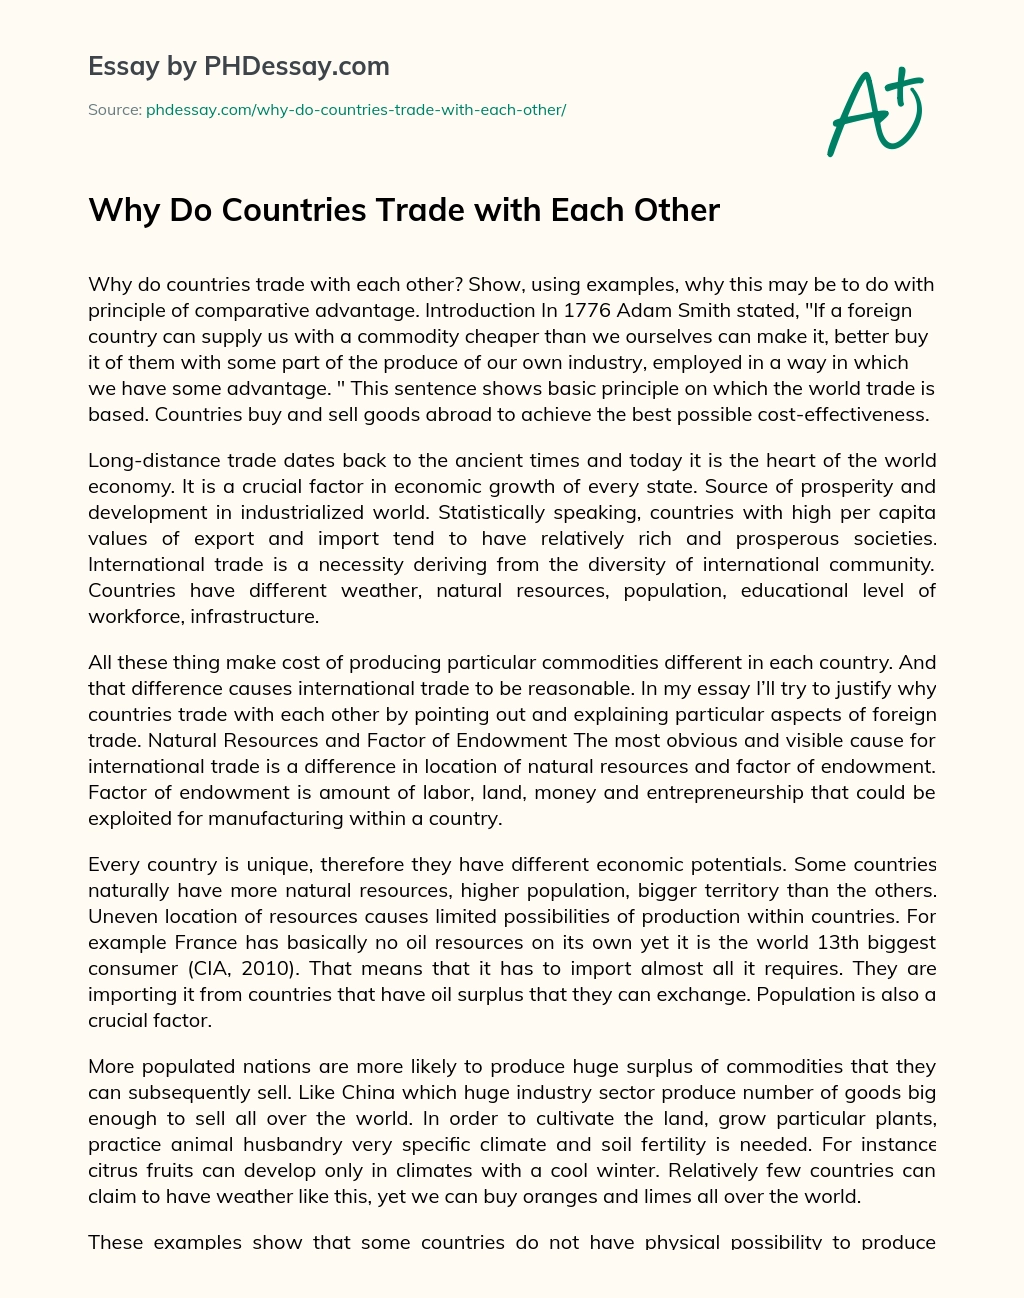 Why Do Countries Trade with Each Other essay